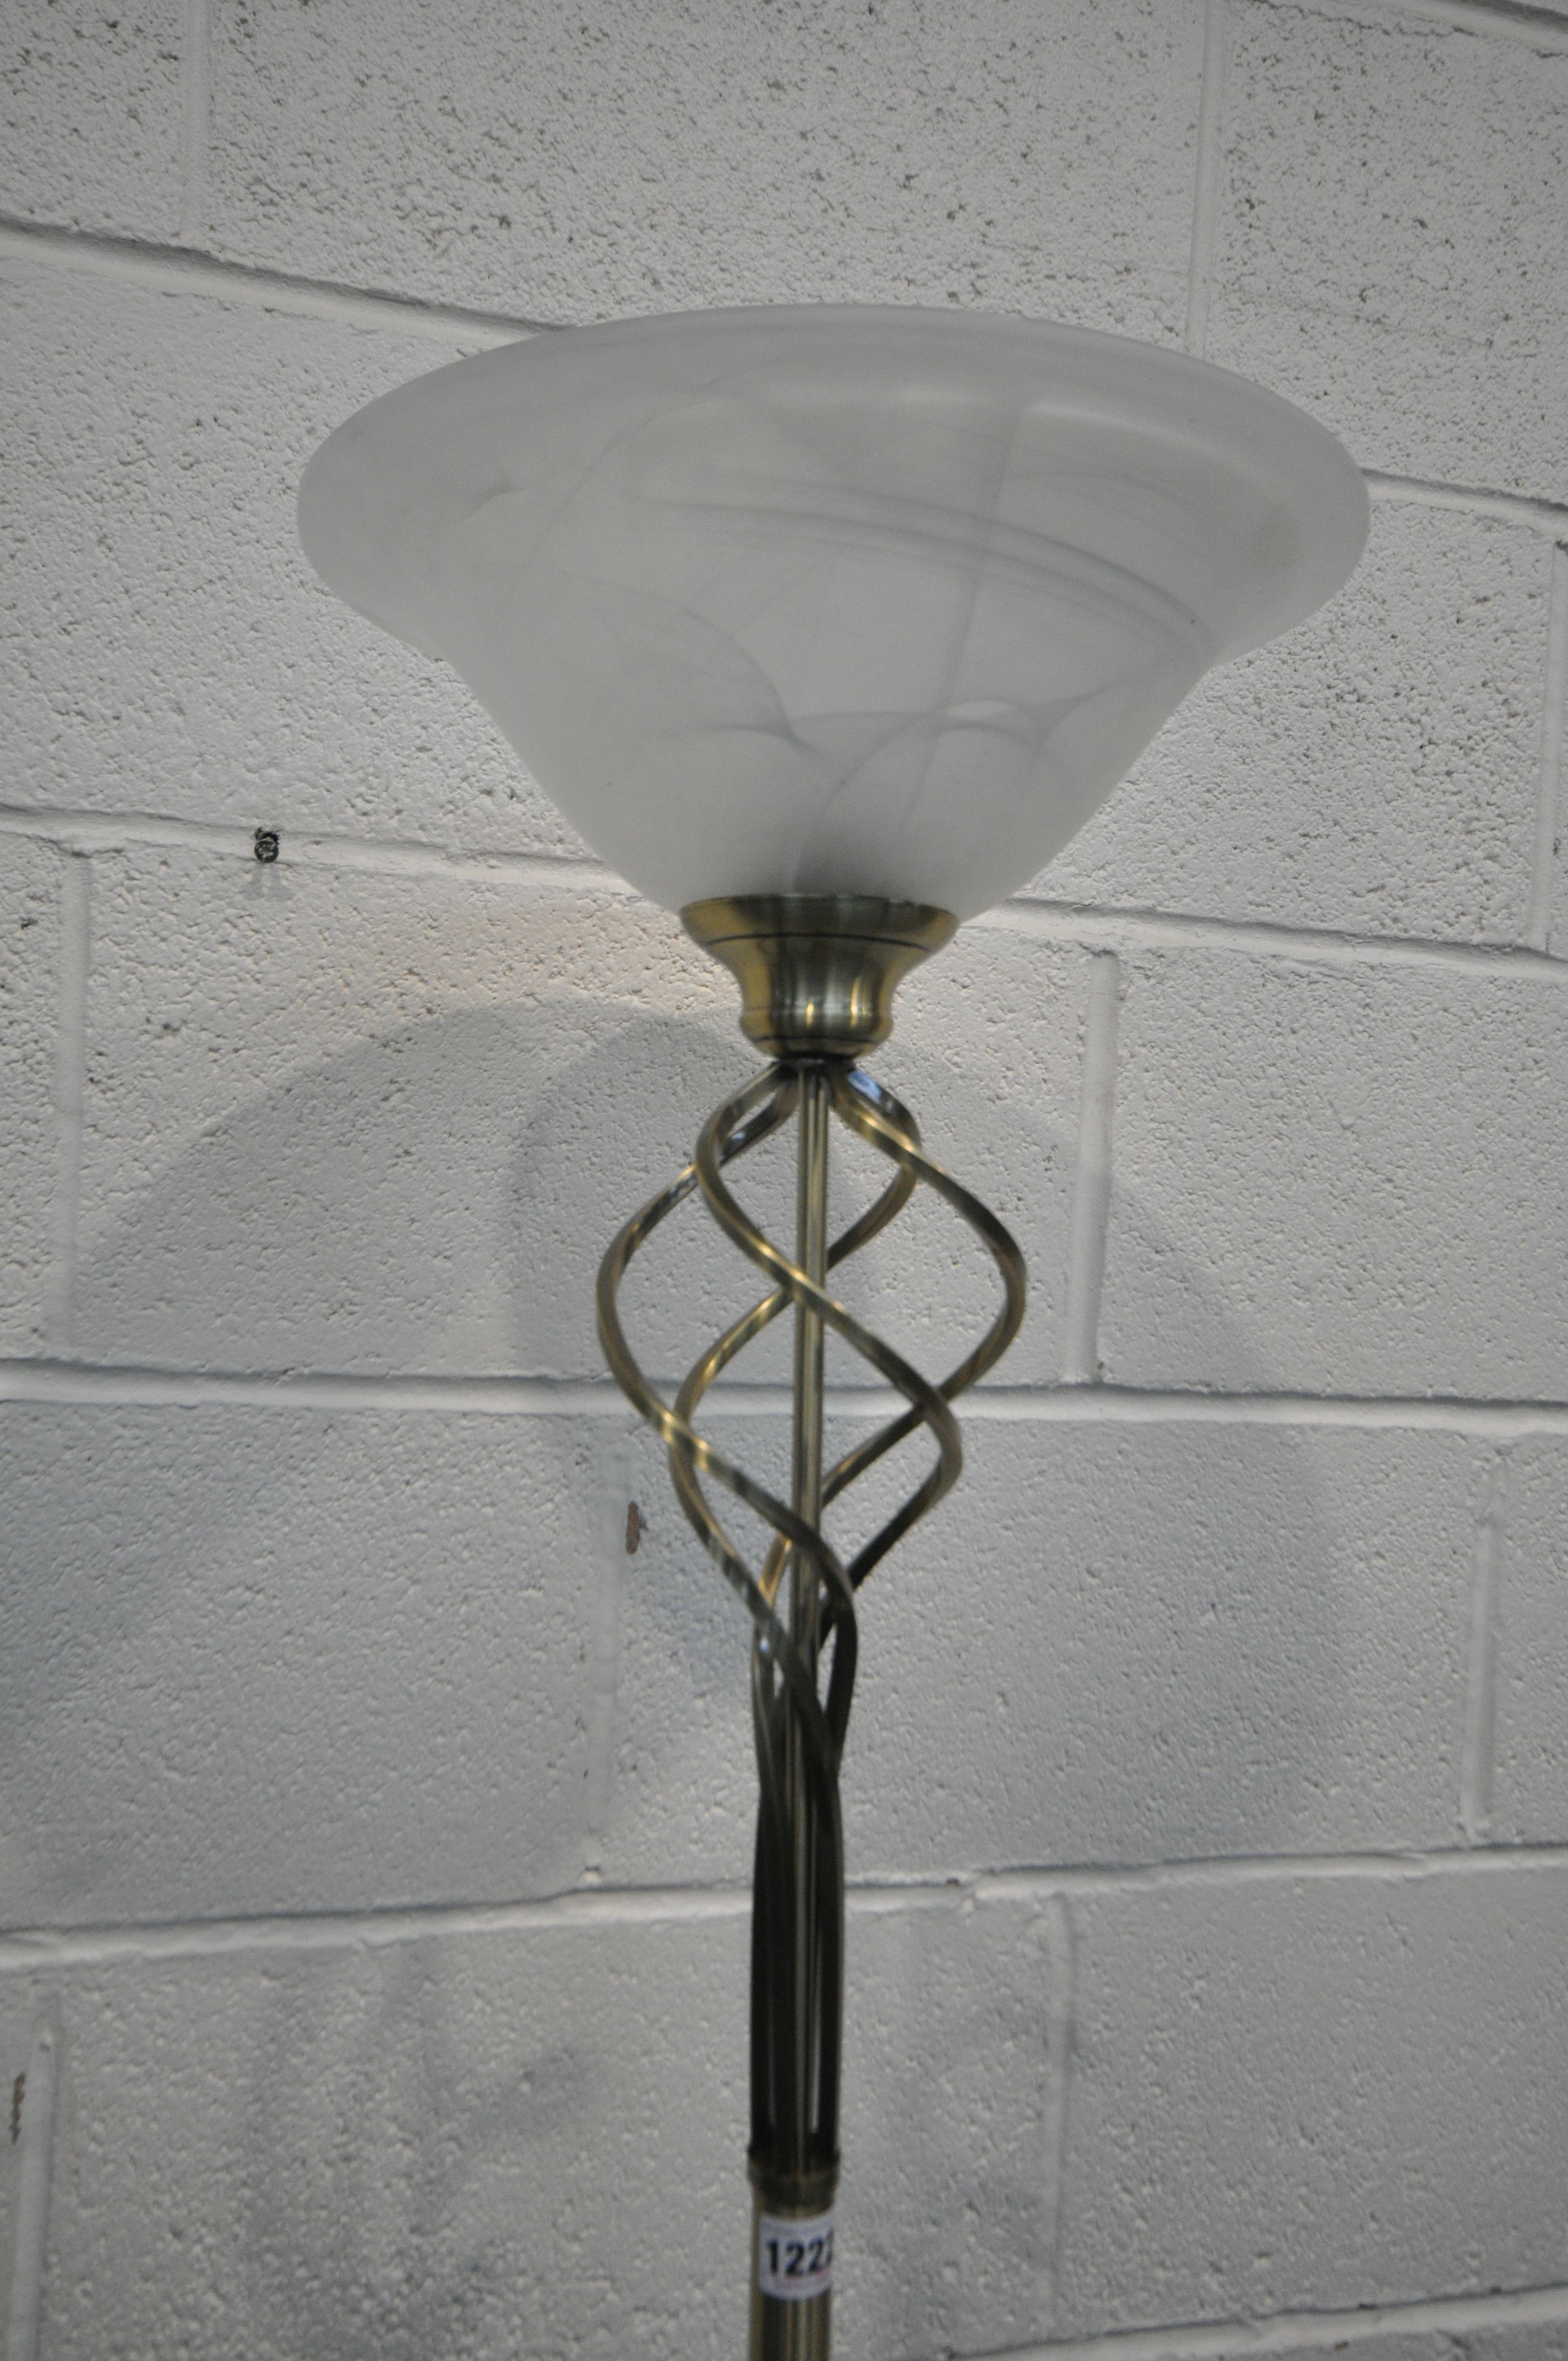 A MODERN FLOOR LAMP, with a frosted glass shade, three white painted chairs, and a traveling - Image 2 of 3